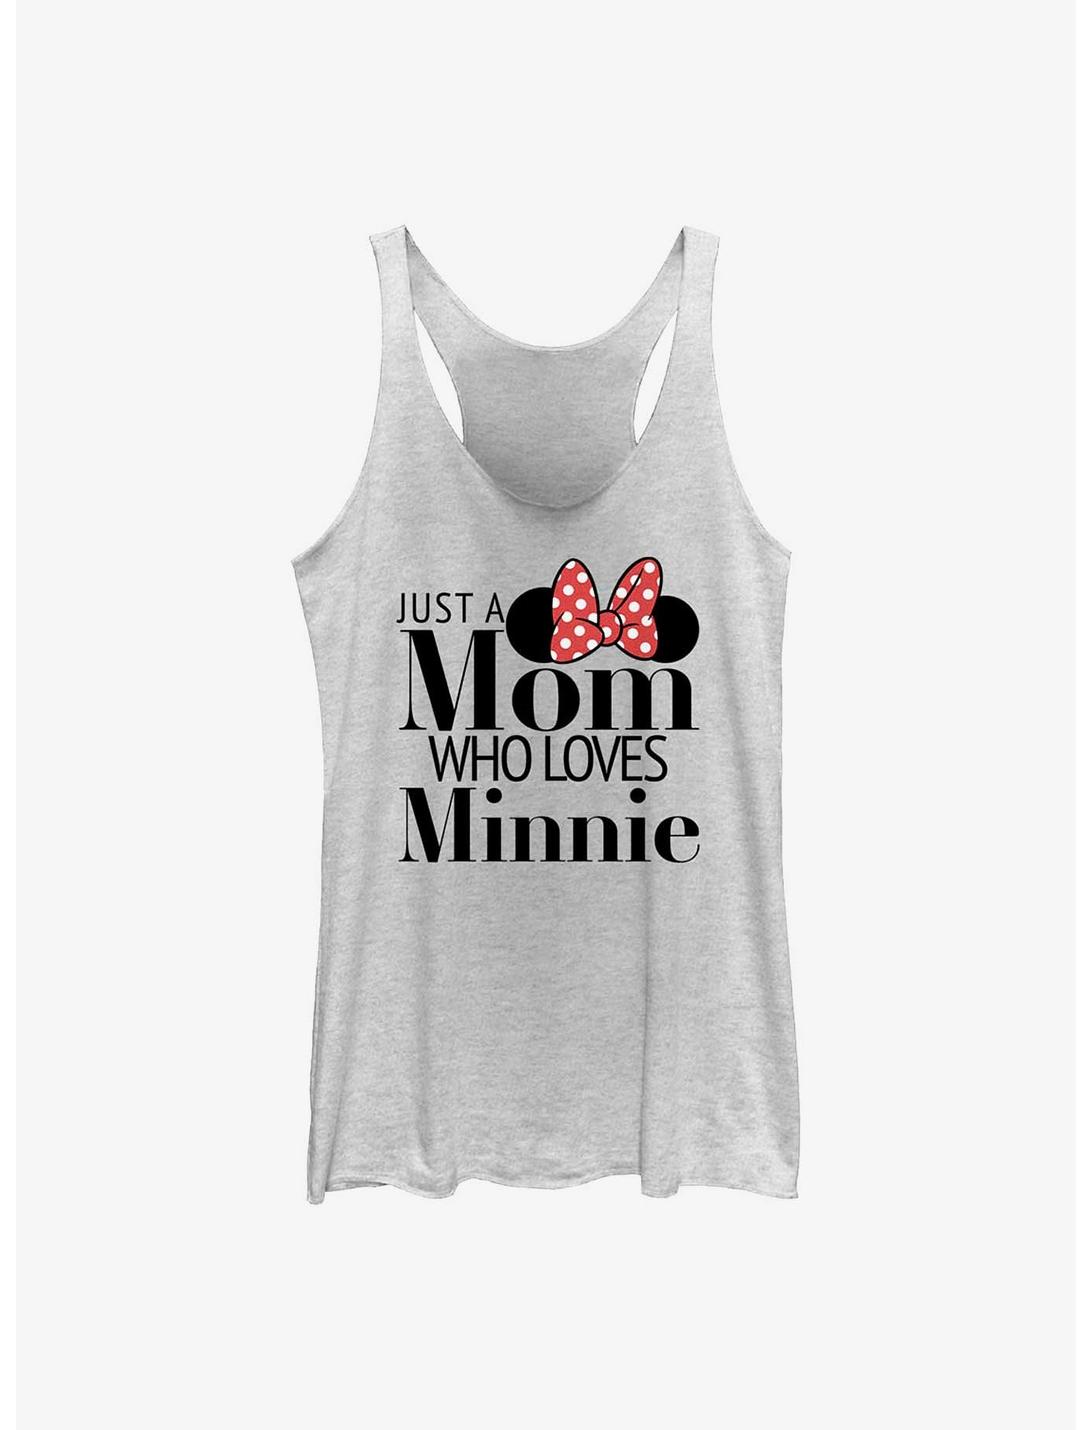 Disney Minnie Mouse Just A Mom Who Loves Minnie Womens Tank Top, WHITE HTR, hi-res